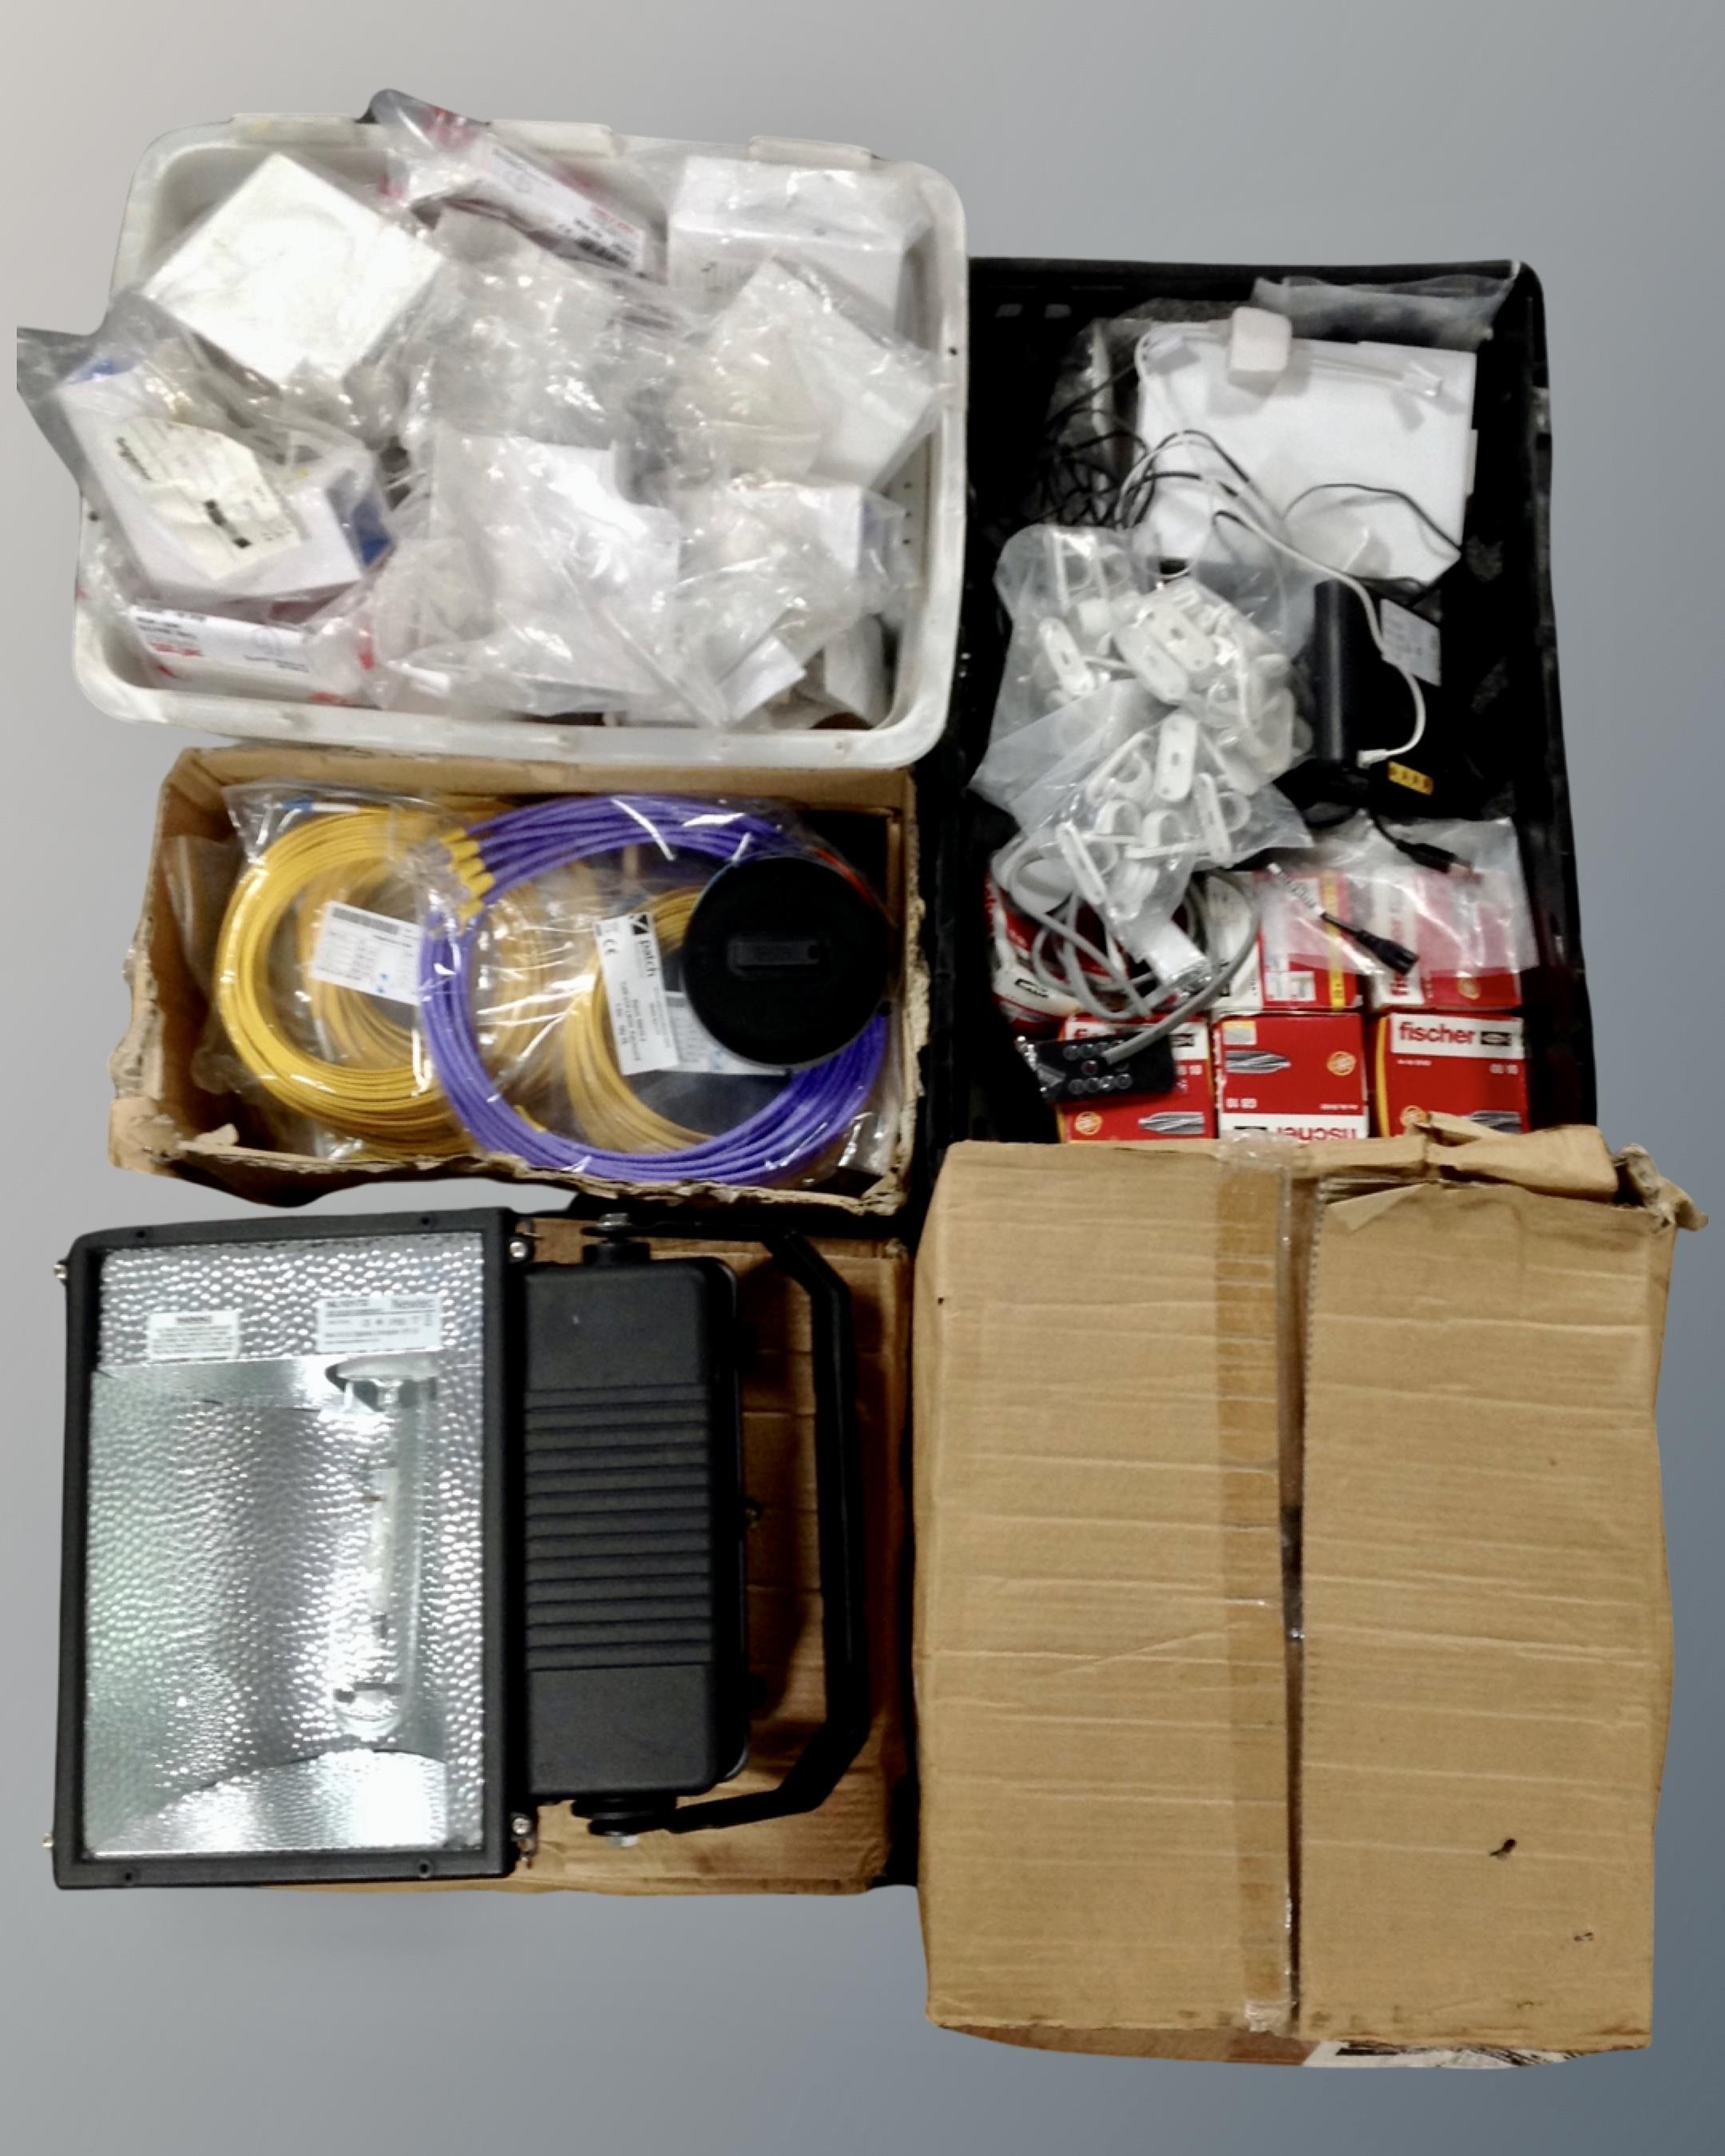 Four Newnec reflector lights together with three crates containing data cables, plastic fittings,